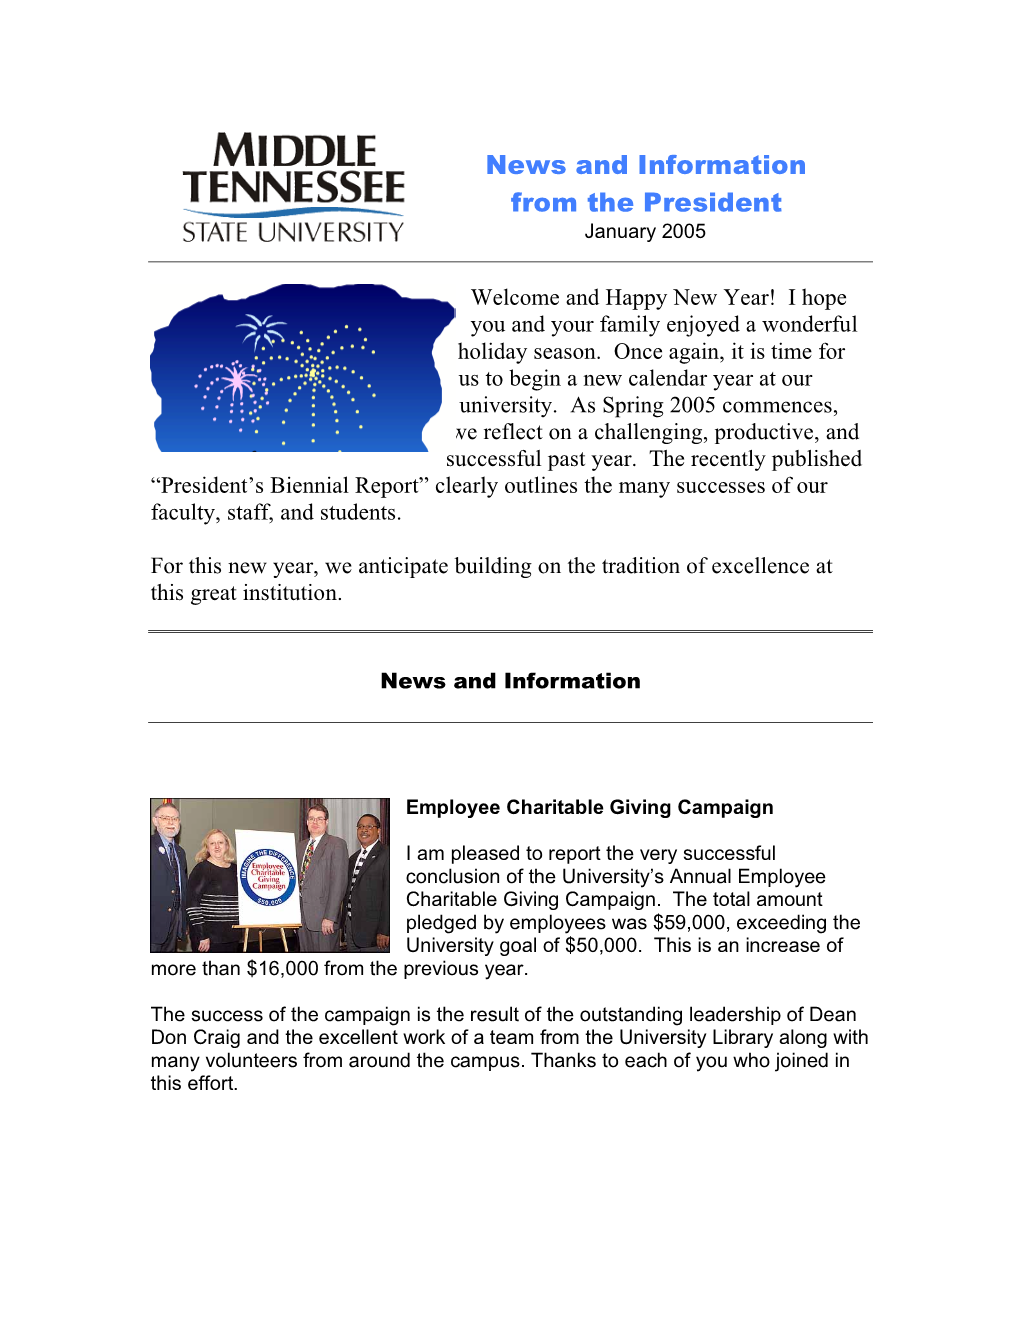 News and Information from the President January 2005